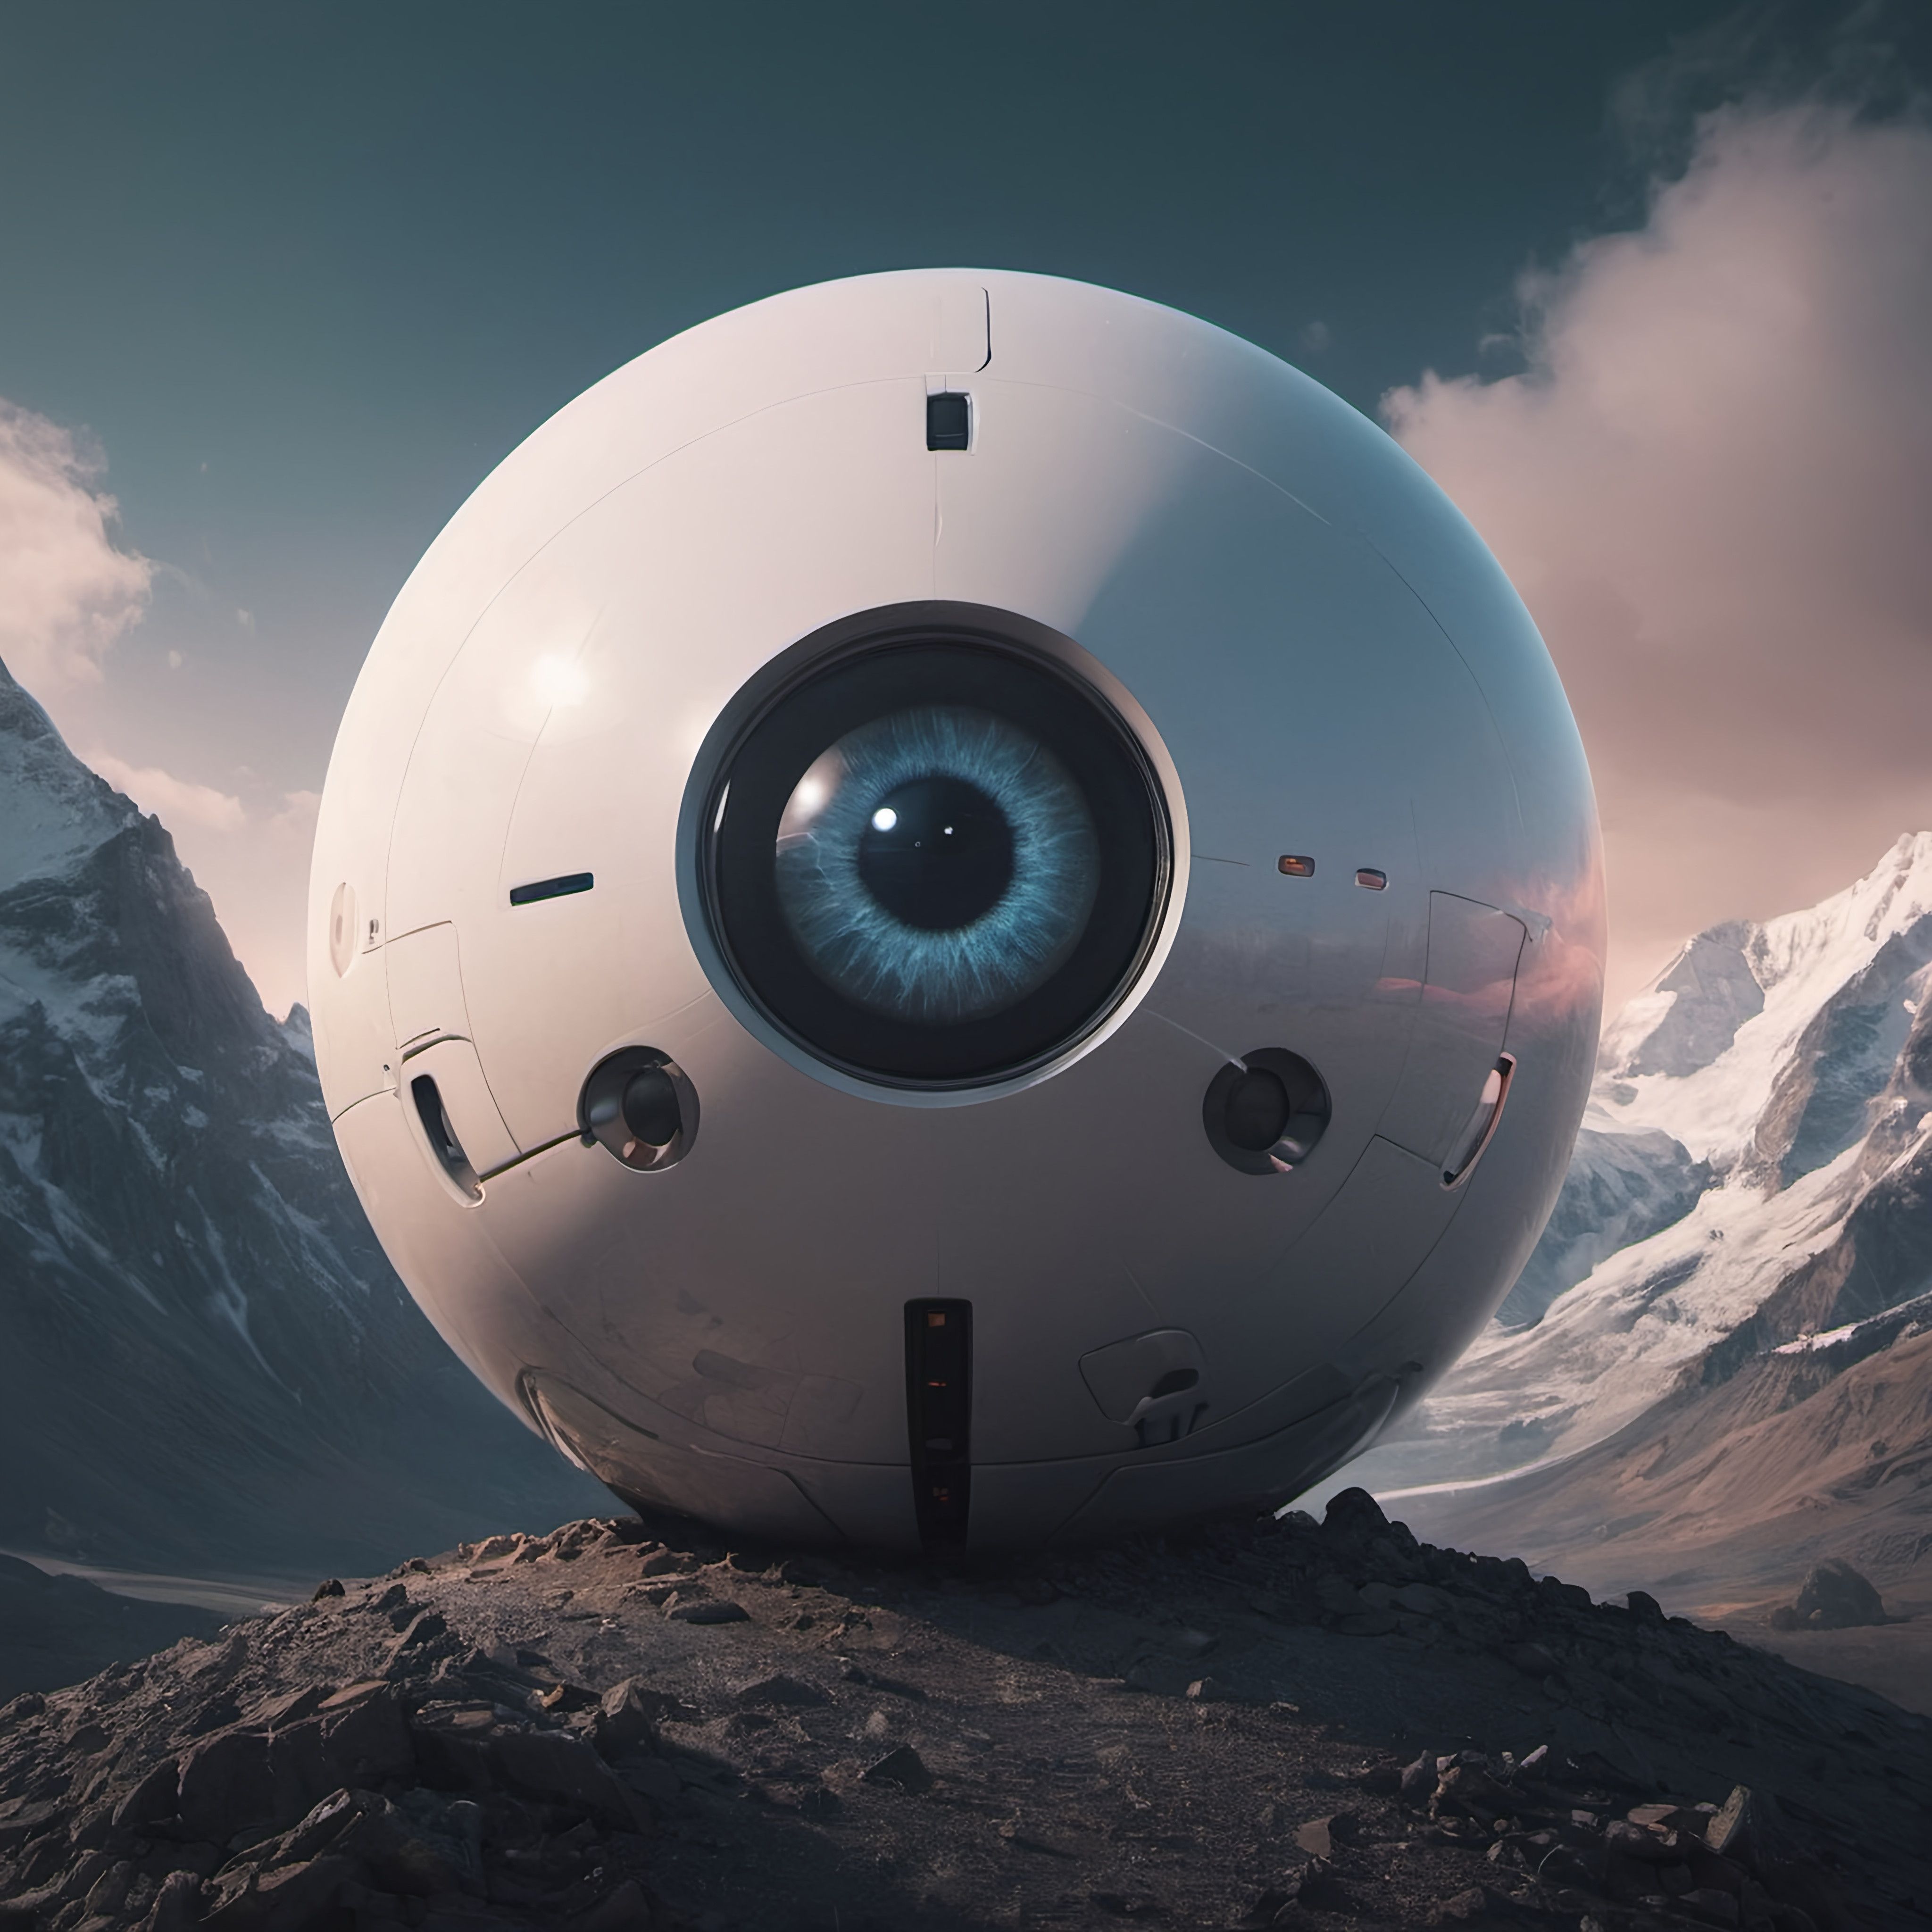 Prompt: a large white art object with a blue eye on top of a mountain with snow covered mountains in the background